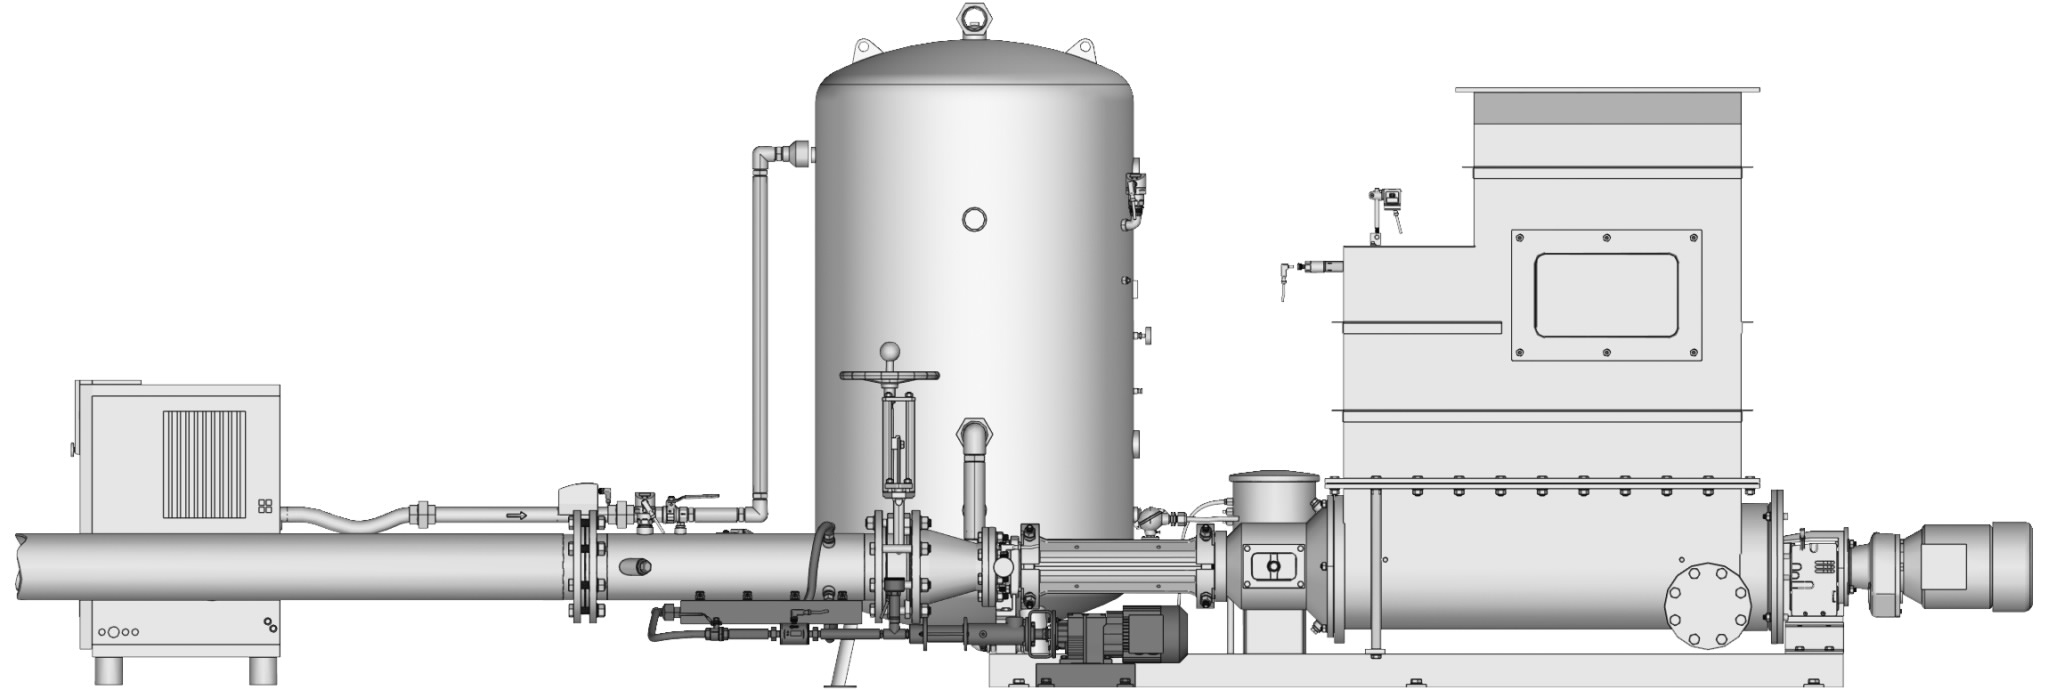 Technical drawing of SEEPEX Smart Air Injection (SAI) technoly for sewage treatment applications.